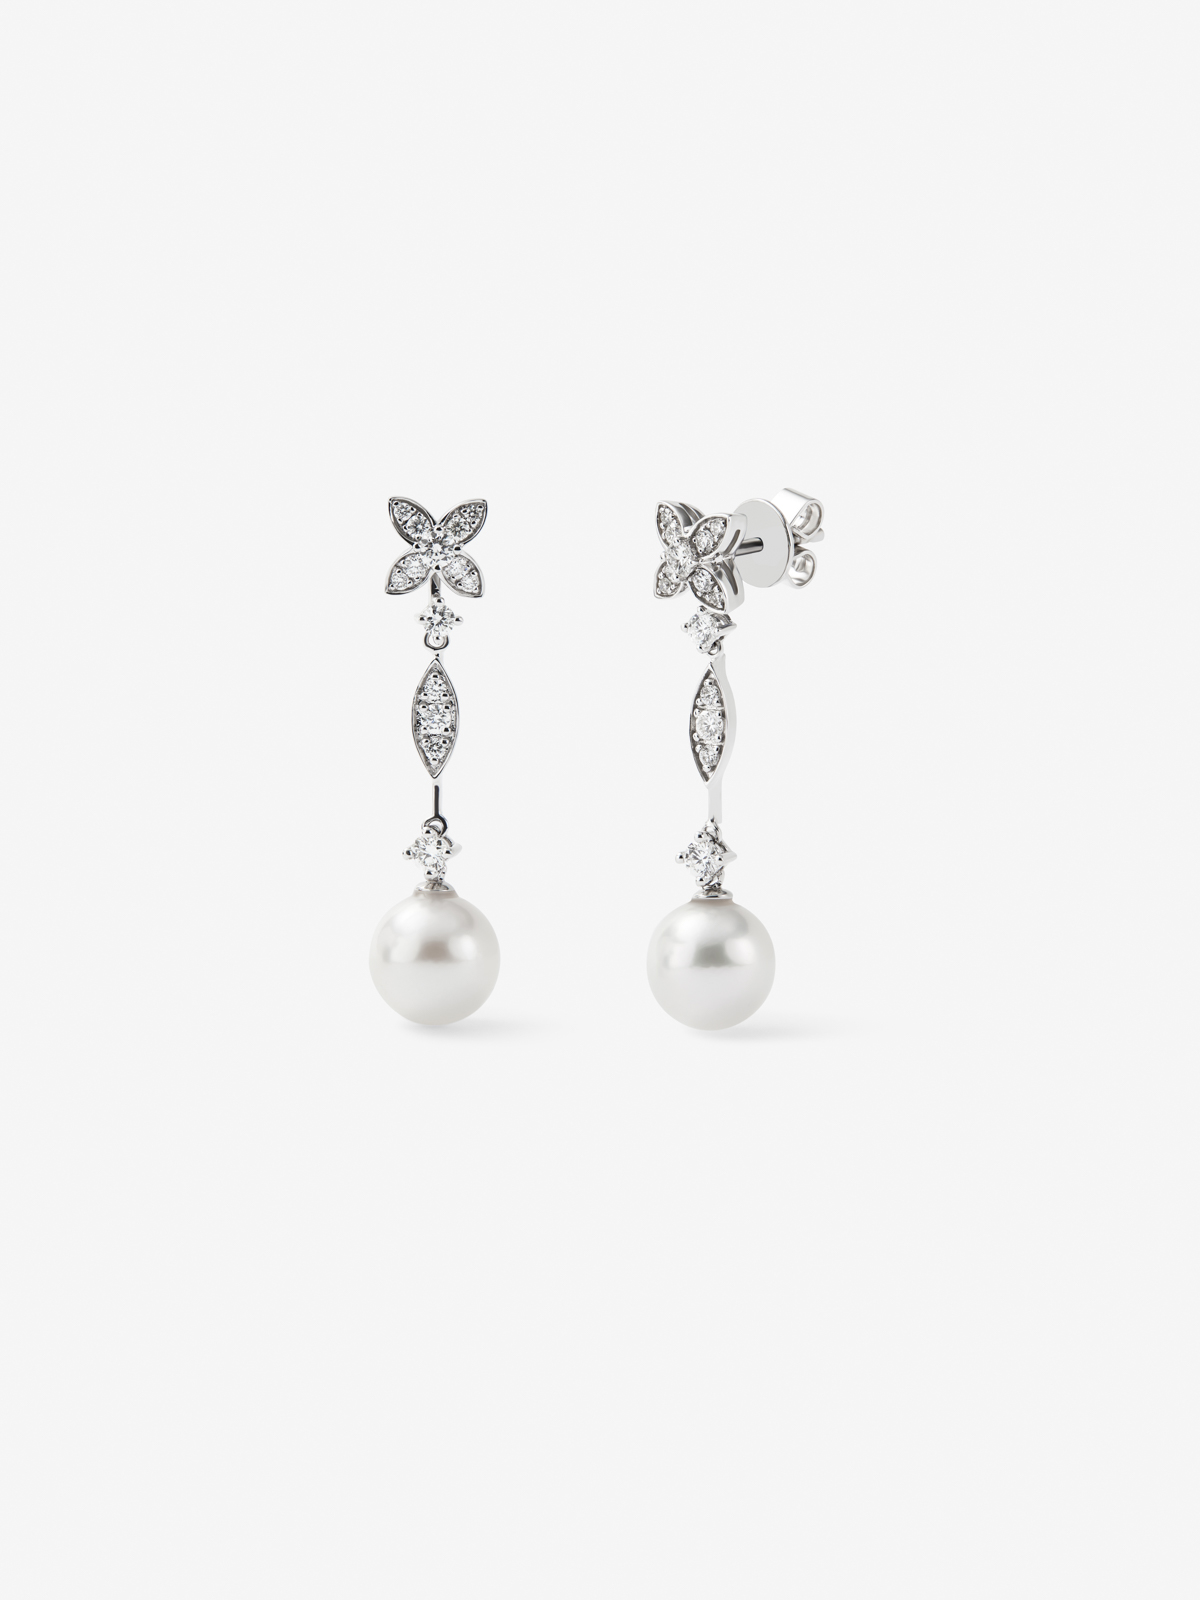 Detachable 18K white gold earrings with 0.99 ct brilliant-cut diamonds and 8.5 mm pearls